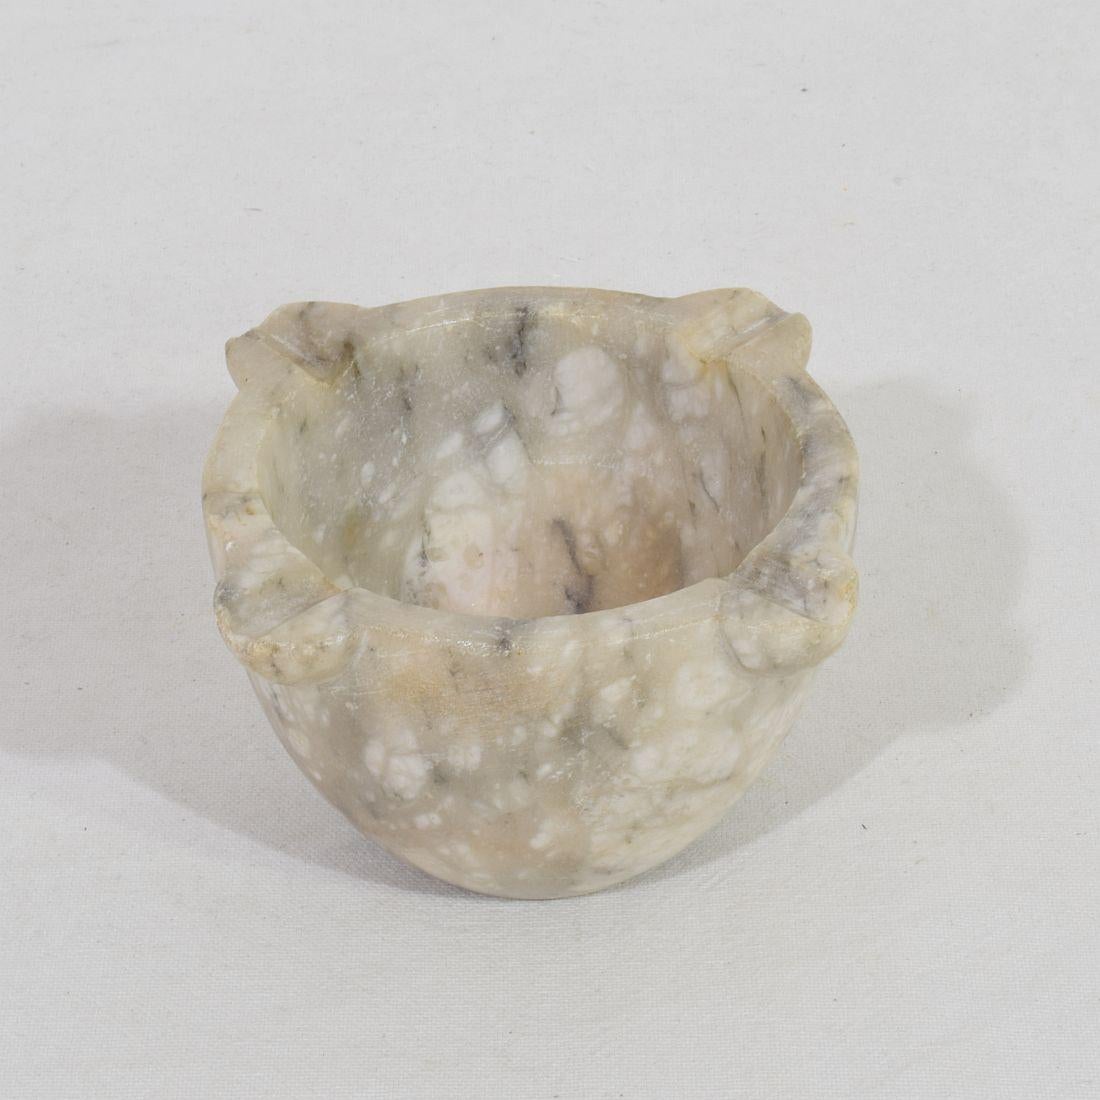 Lovely and rare small alabaster mortar, France, circa 1750-1850.
Weathered but good condition.